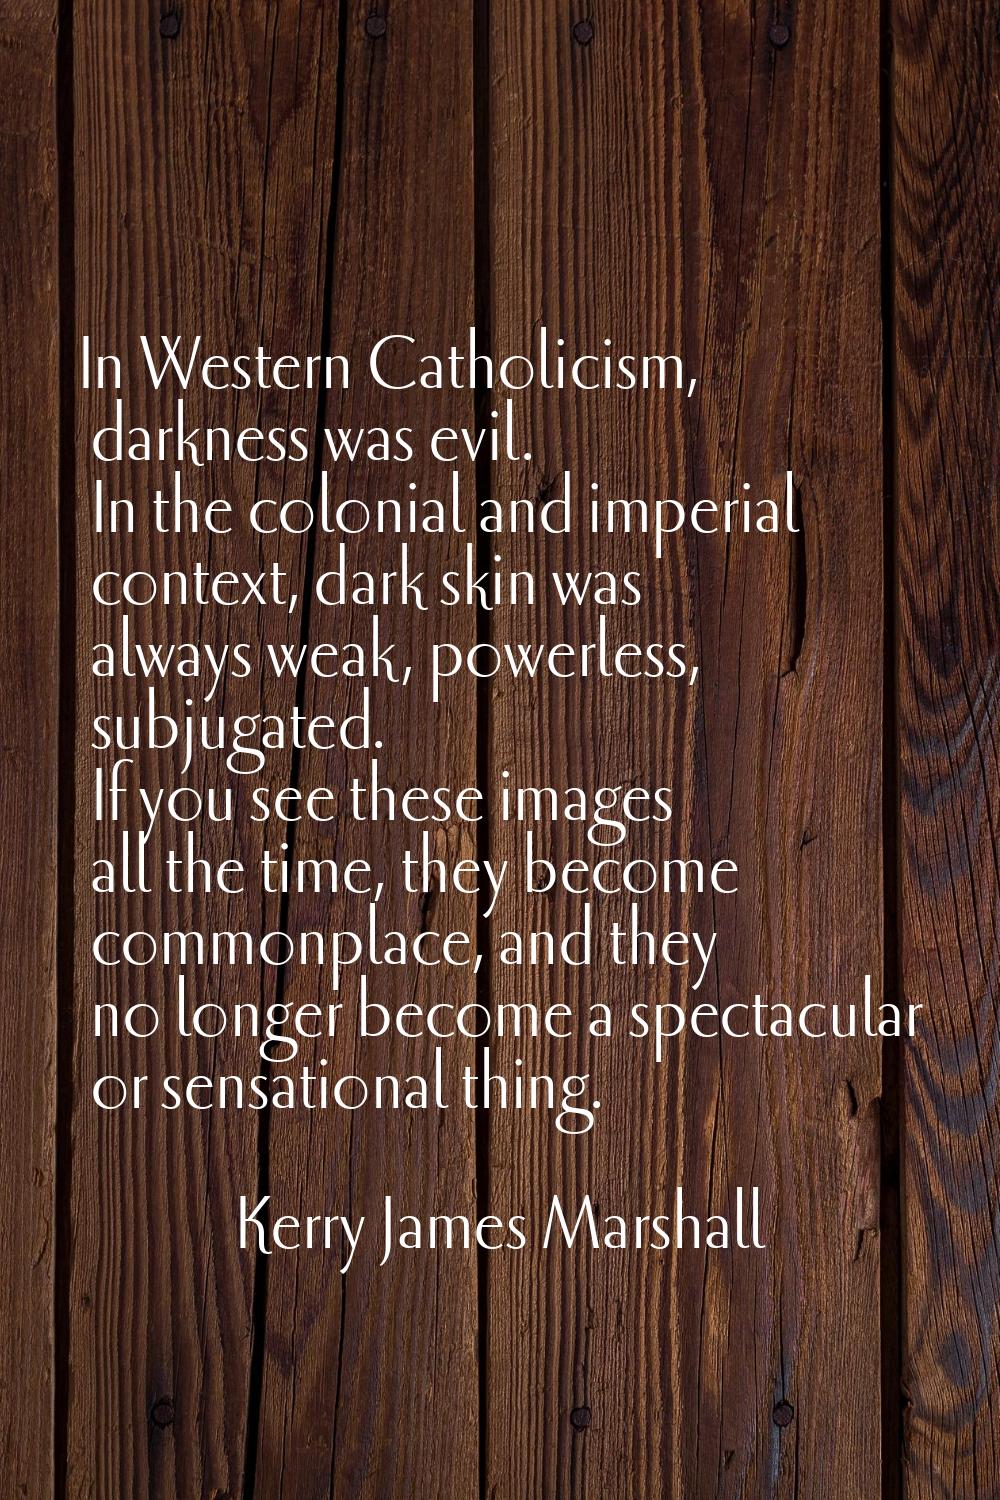 In Western Catholicism, darkness was evil. In the colonial and imperial context, dark skin was alwa